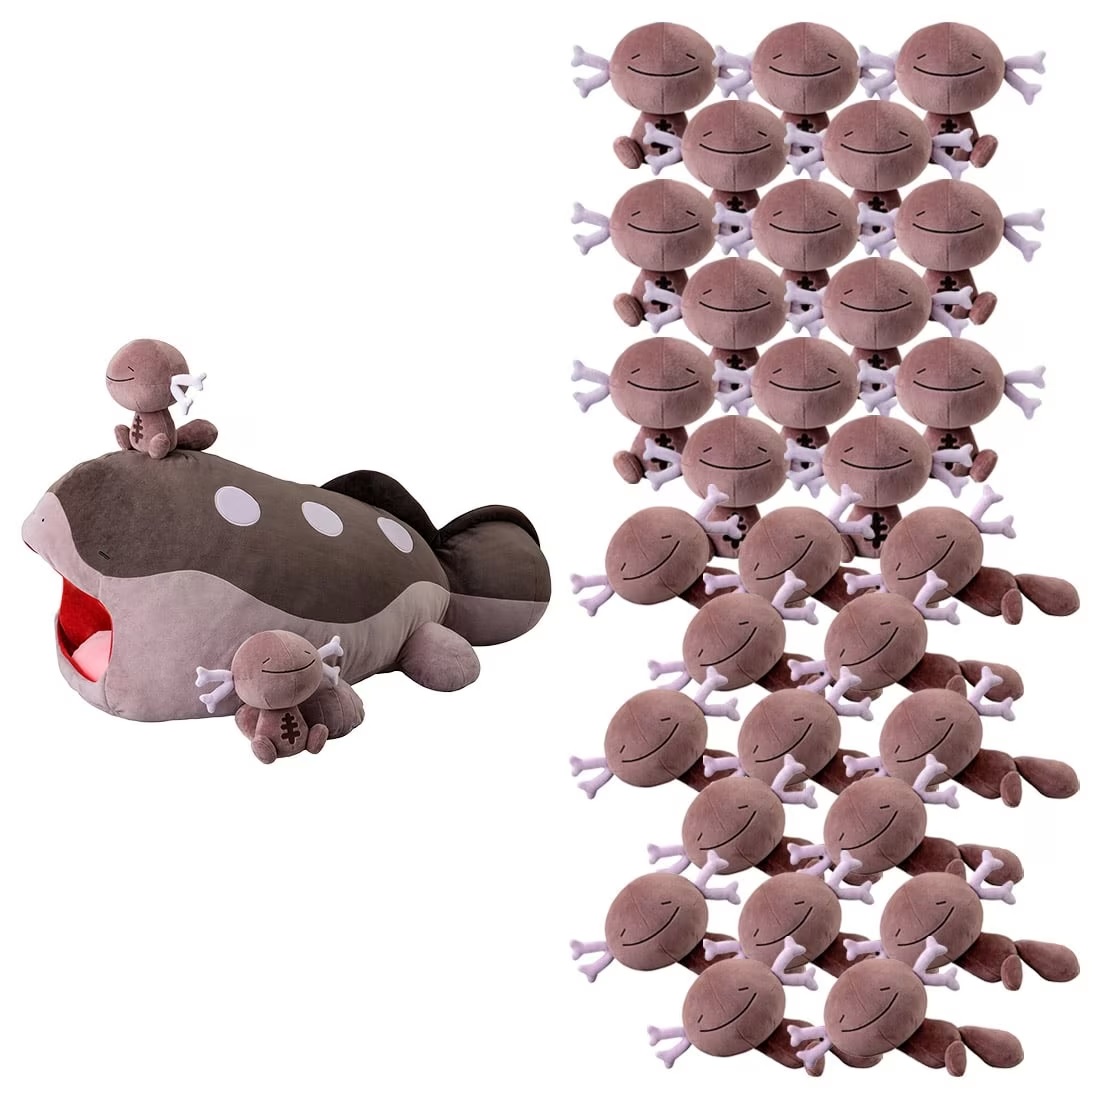 Giant Clodsire Pokémon plushie comes with up to 32 Woopers in 